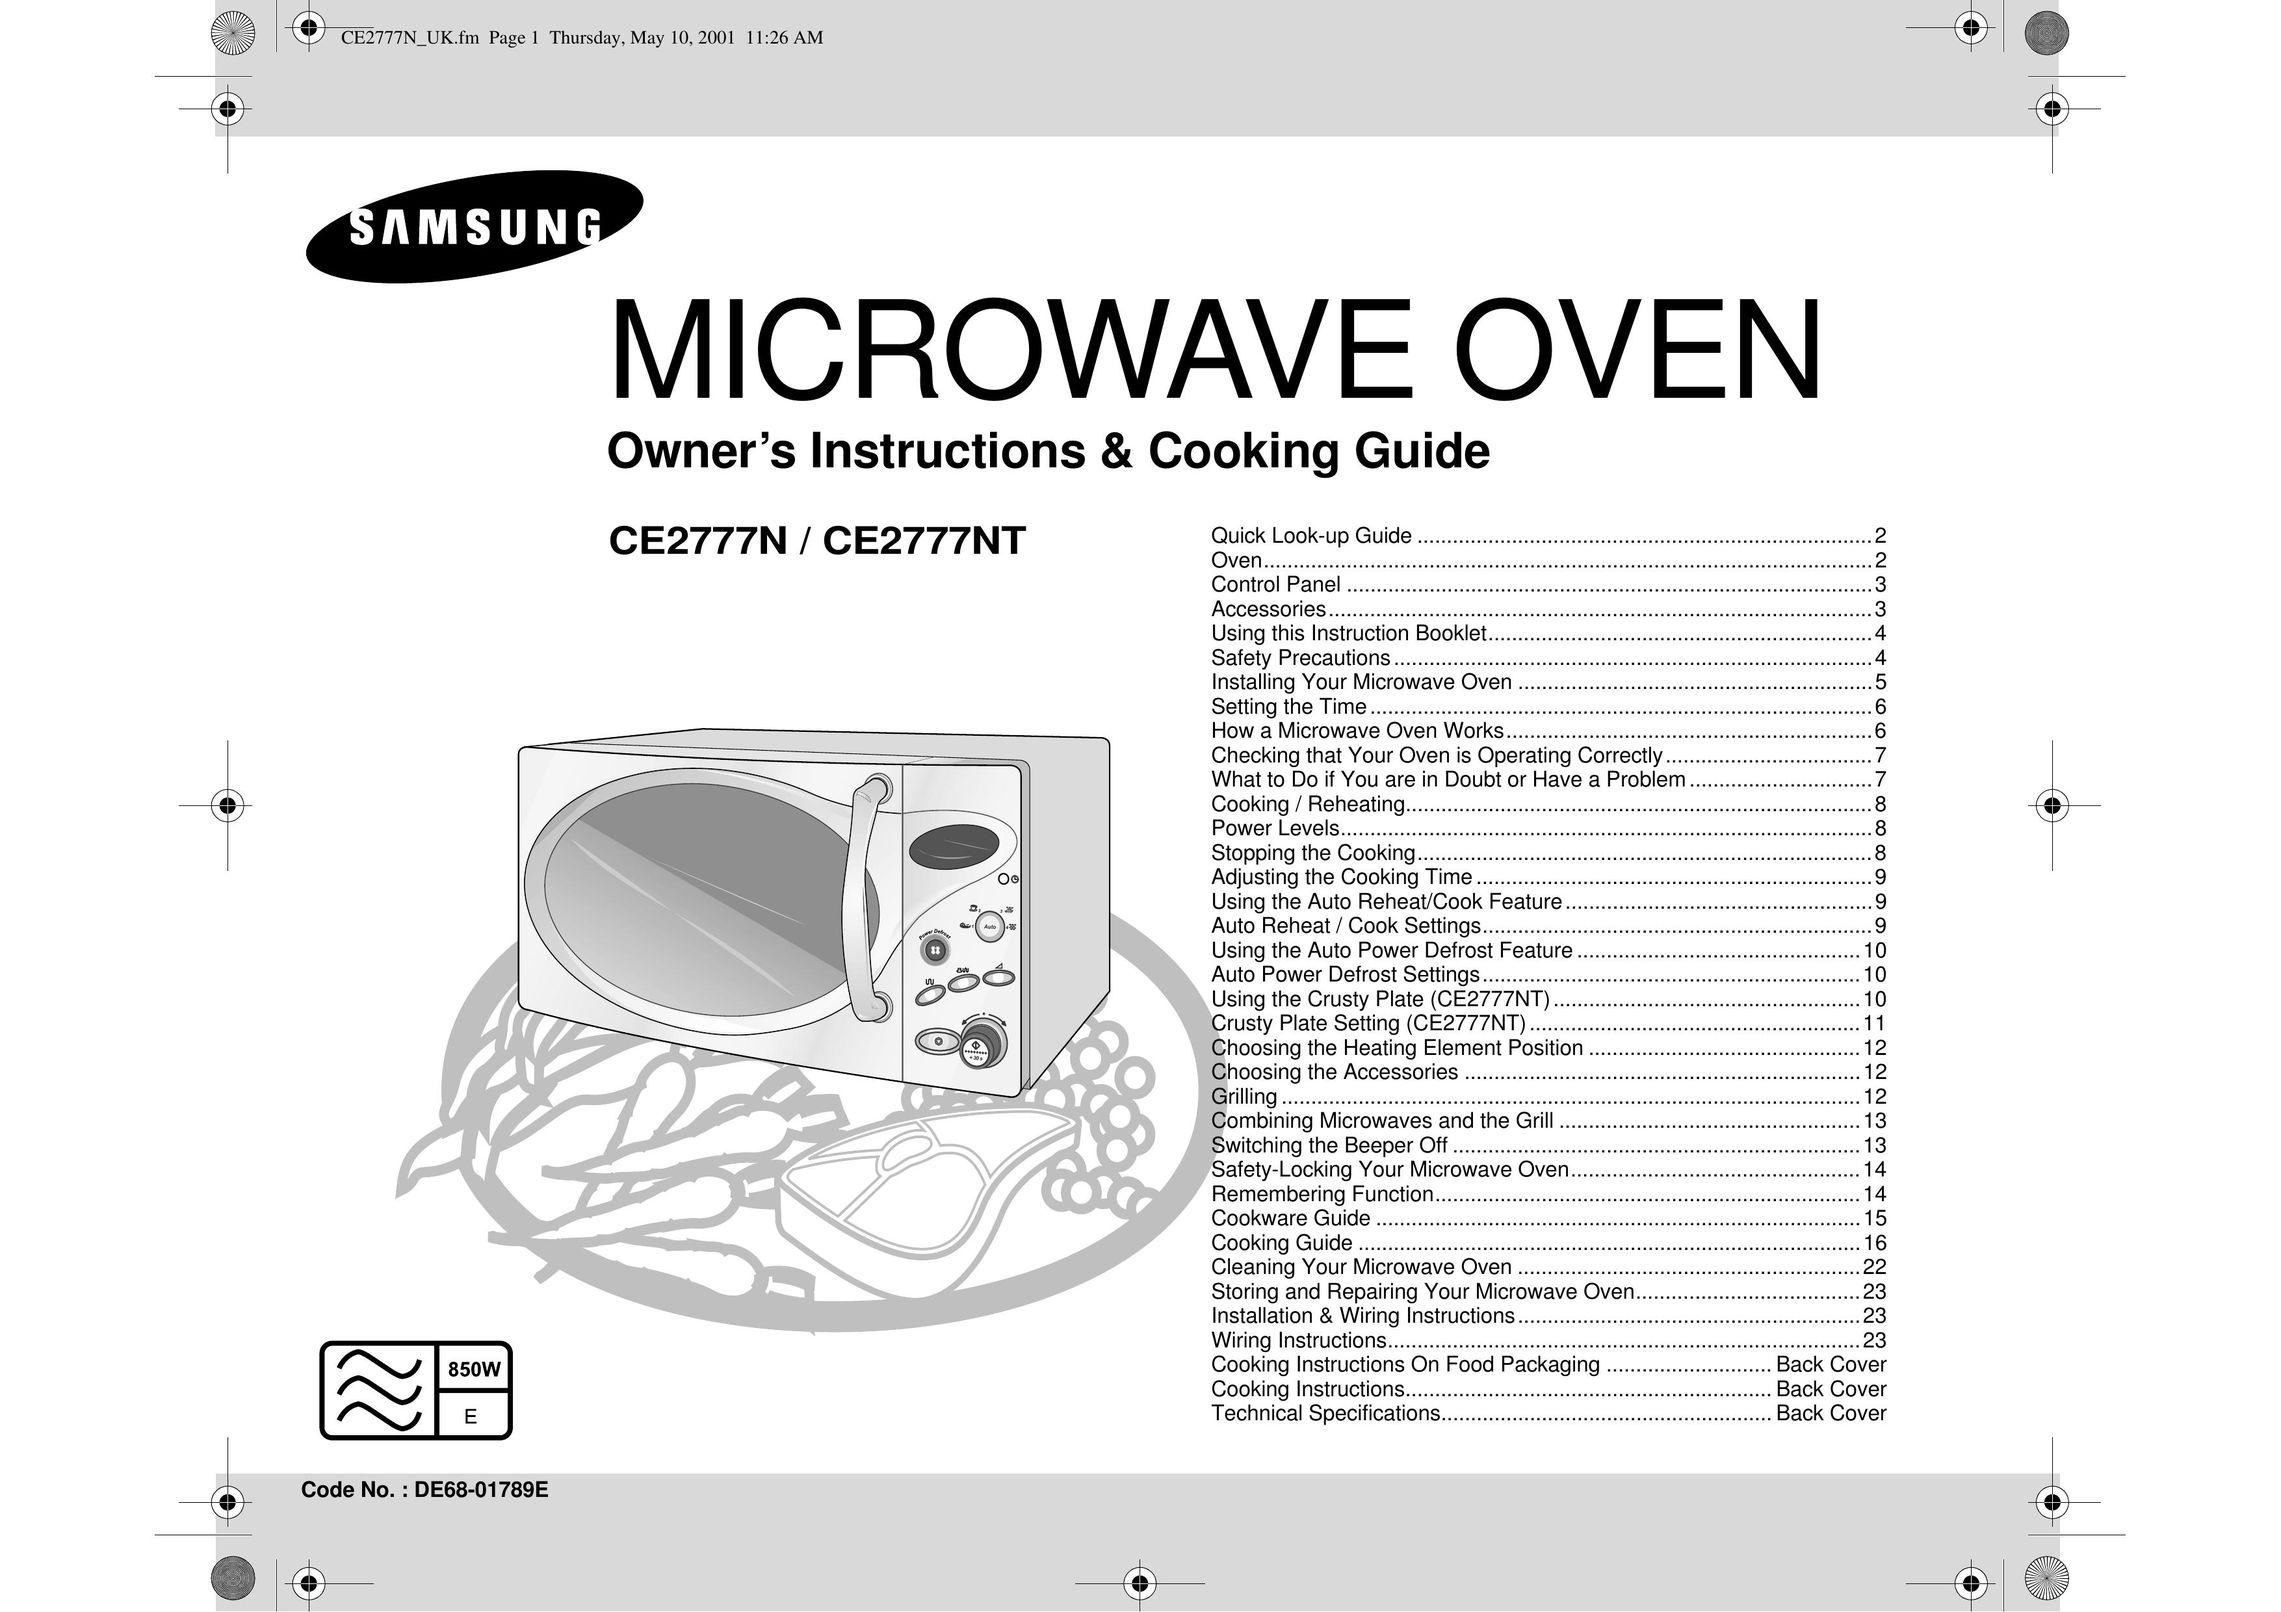 Samsung CE2777NT Microwave Oven User Manual